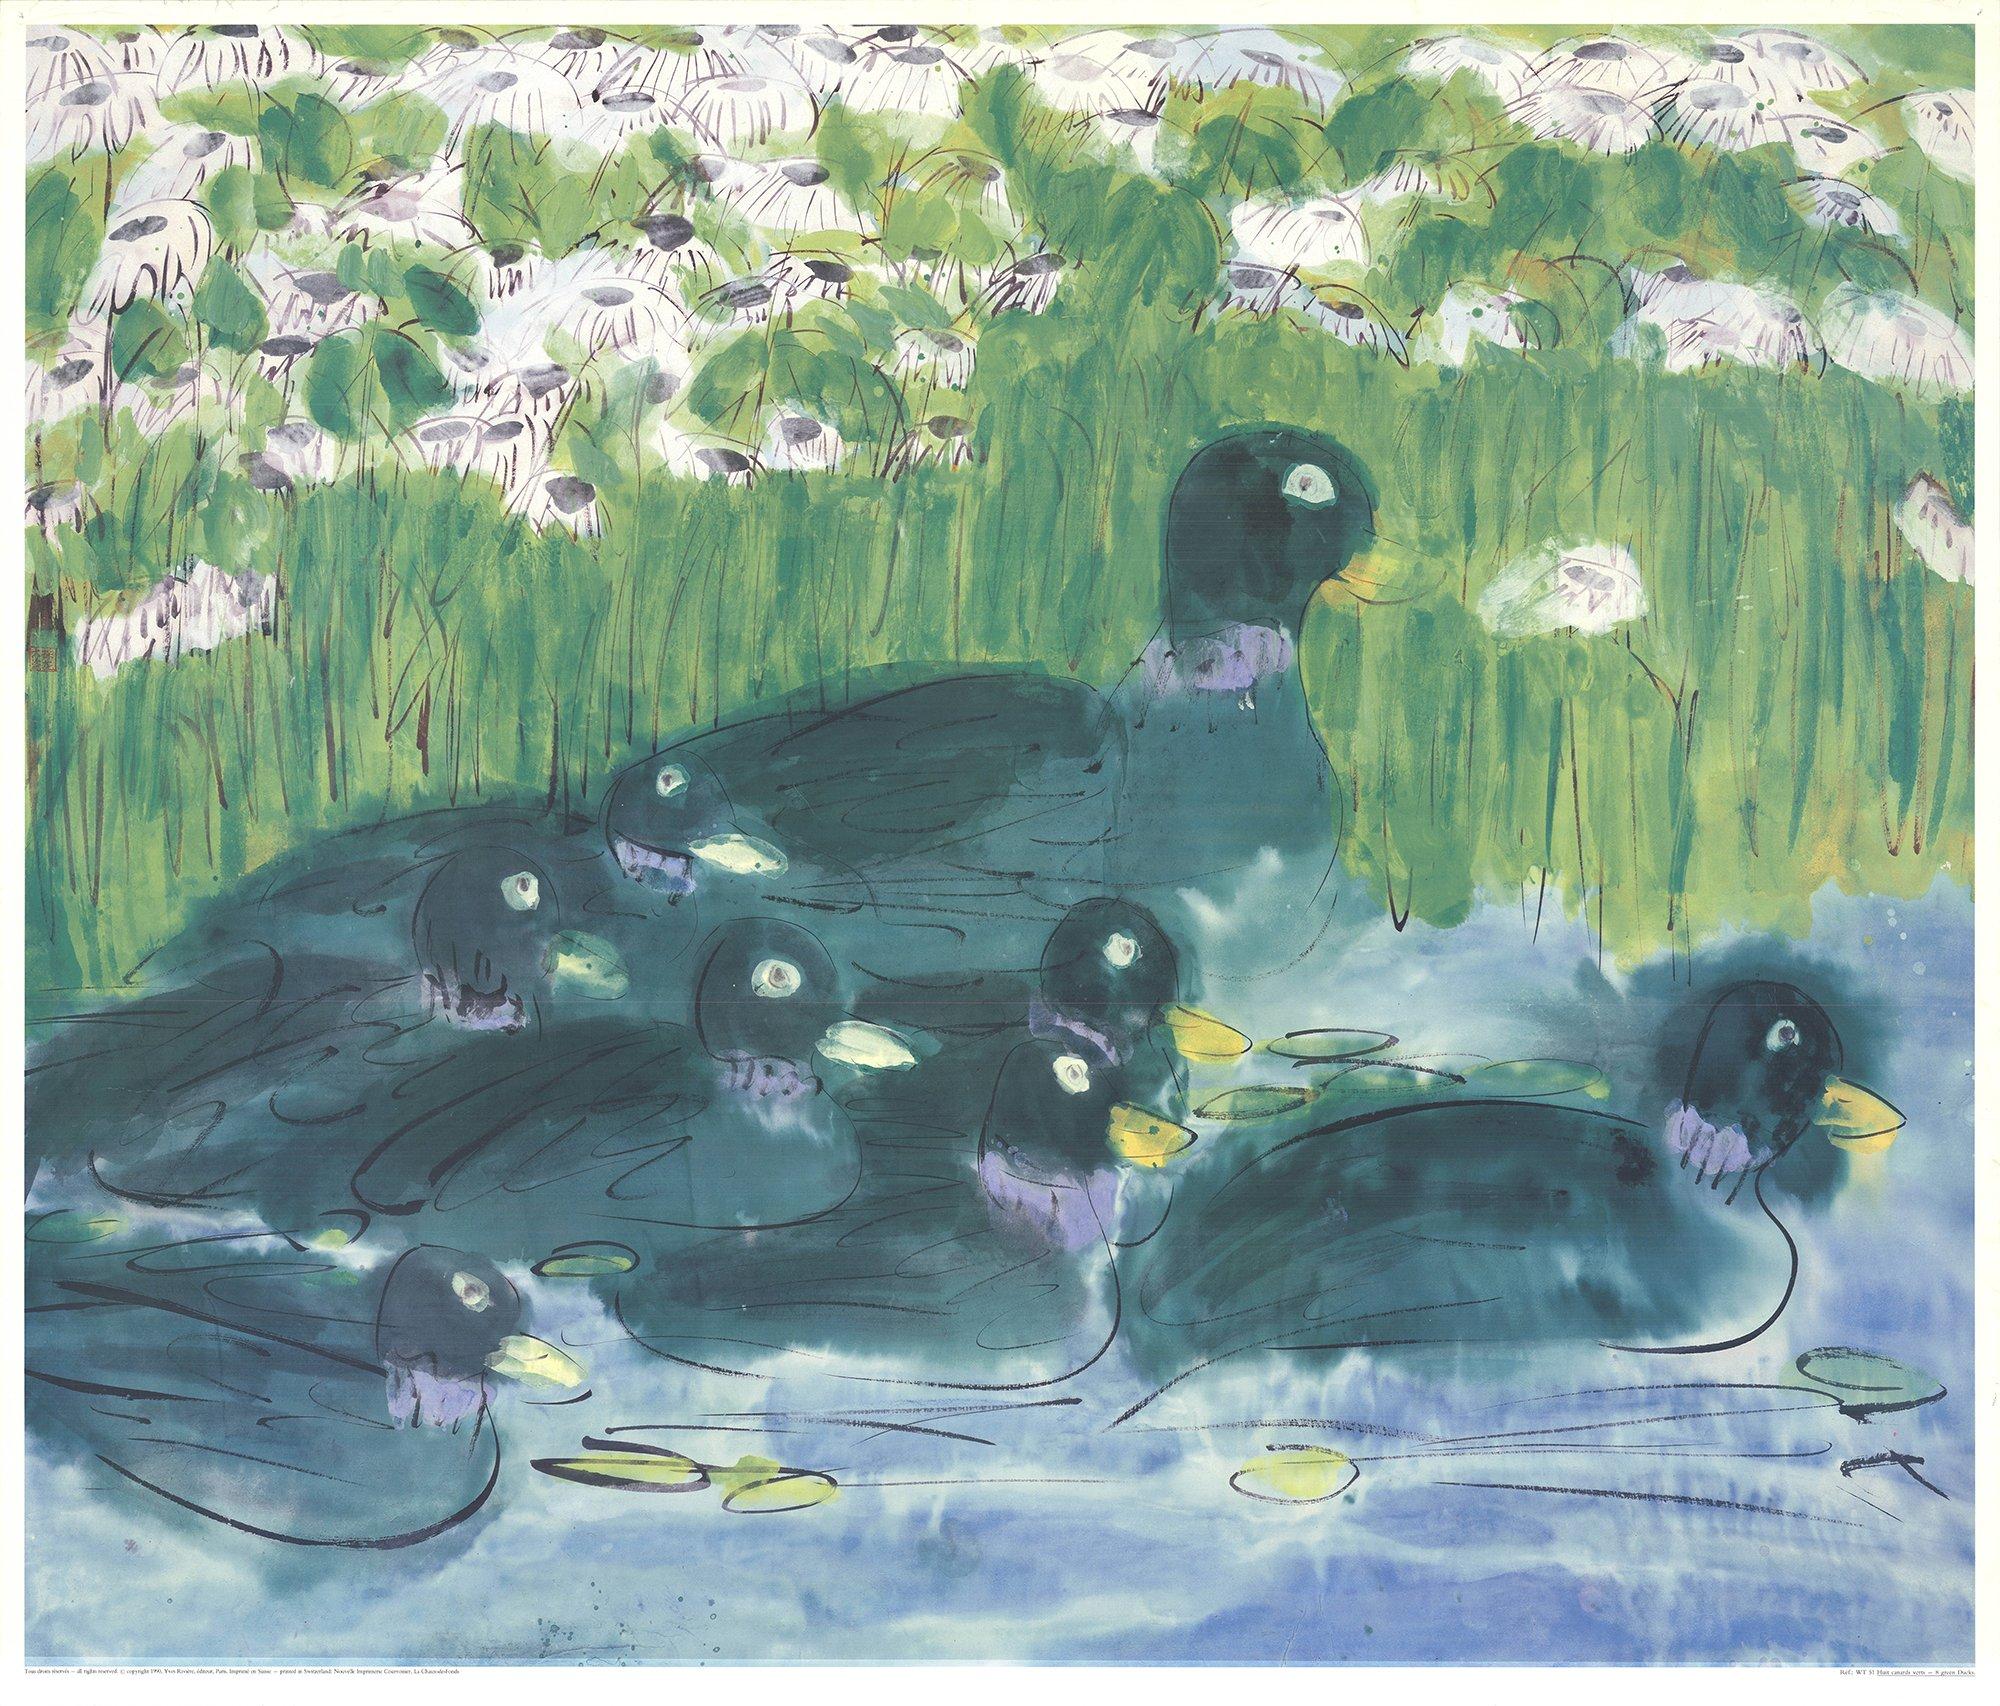 1982 After Walasse ting '8 Green Ducks (No Text)' Contemporary  - Print by Walasse Ting